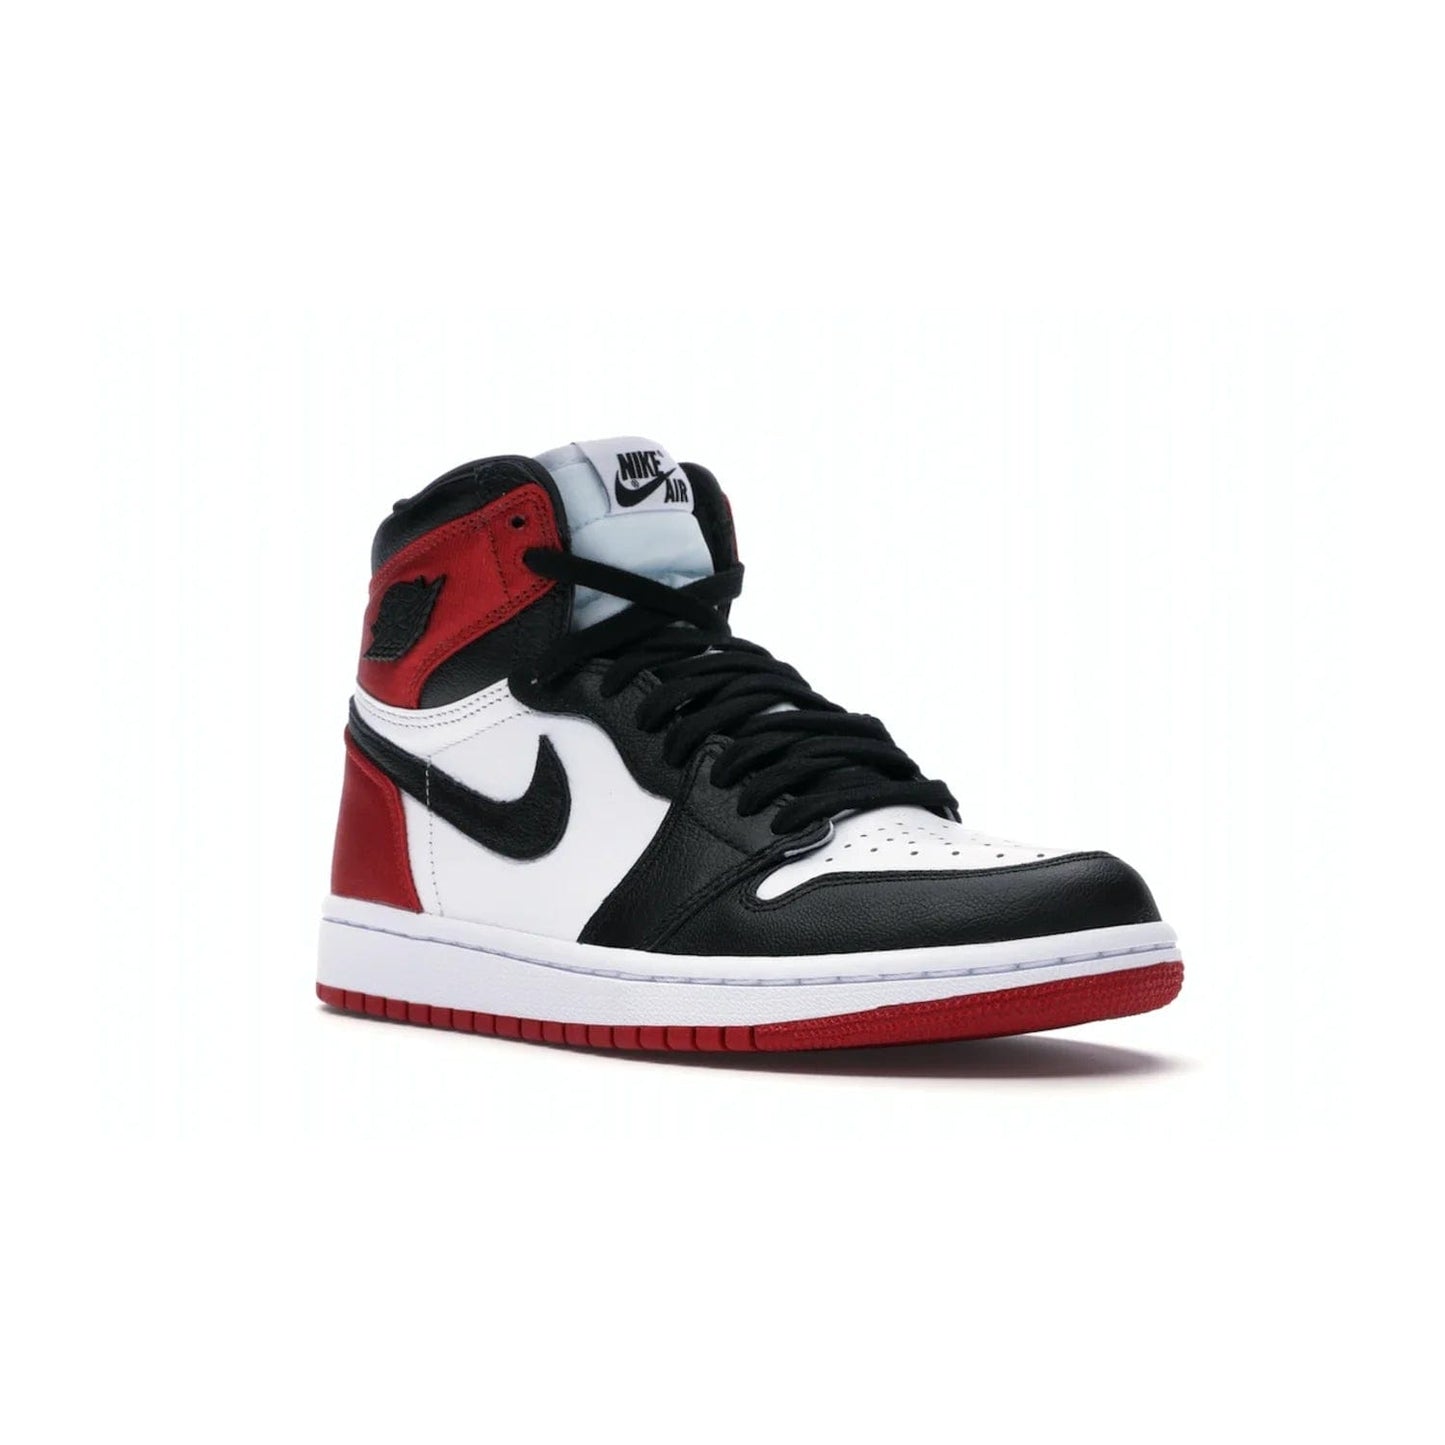 Jordan 1 Retro High Satin Black Toe (Women's) - Image 5 - Only at www.BallersClubKickz.com - Luxurious take on the timeless Air Jordan 1. Features a mix of black leather and satin materials with subtle University Red accents. Elevated look with metal Wings logo on the heel. Released in August 2019.